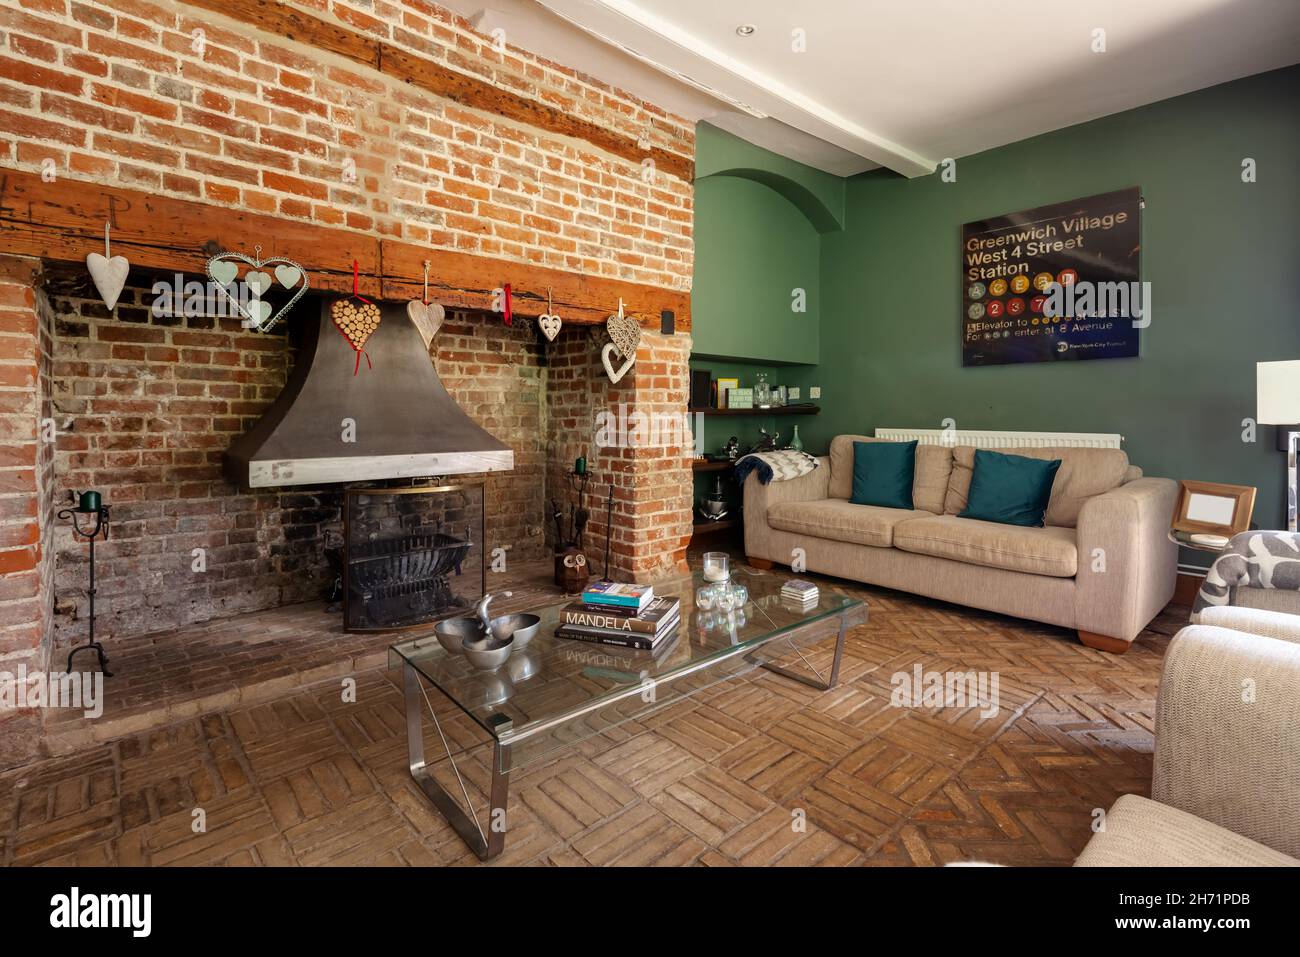 Ashdon, England  - July 25 2019: traditional farmhouse living room inside British home with large exposed brick inglenook fireplace Stock Photo